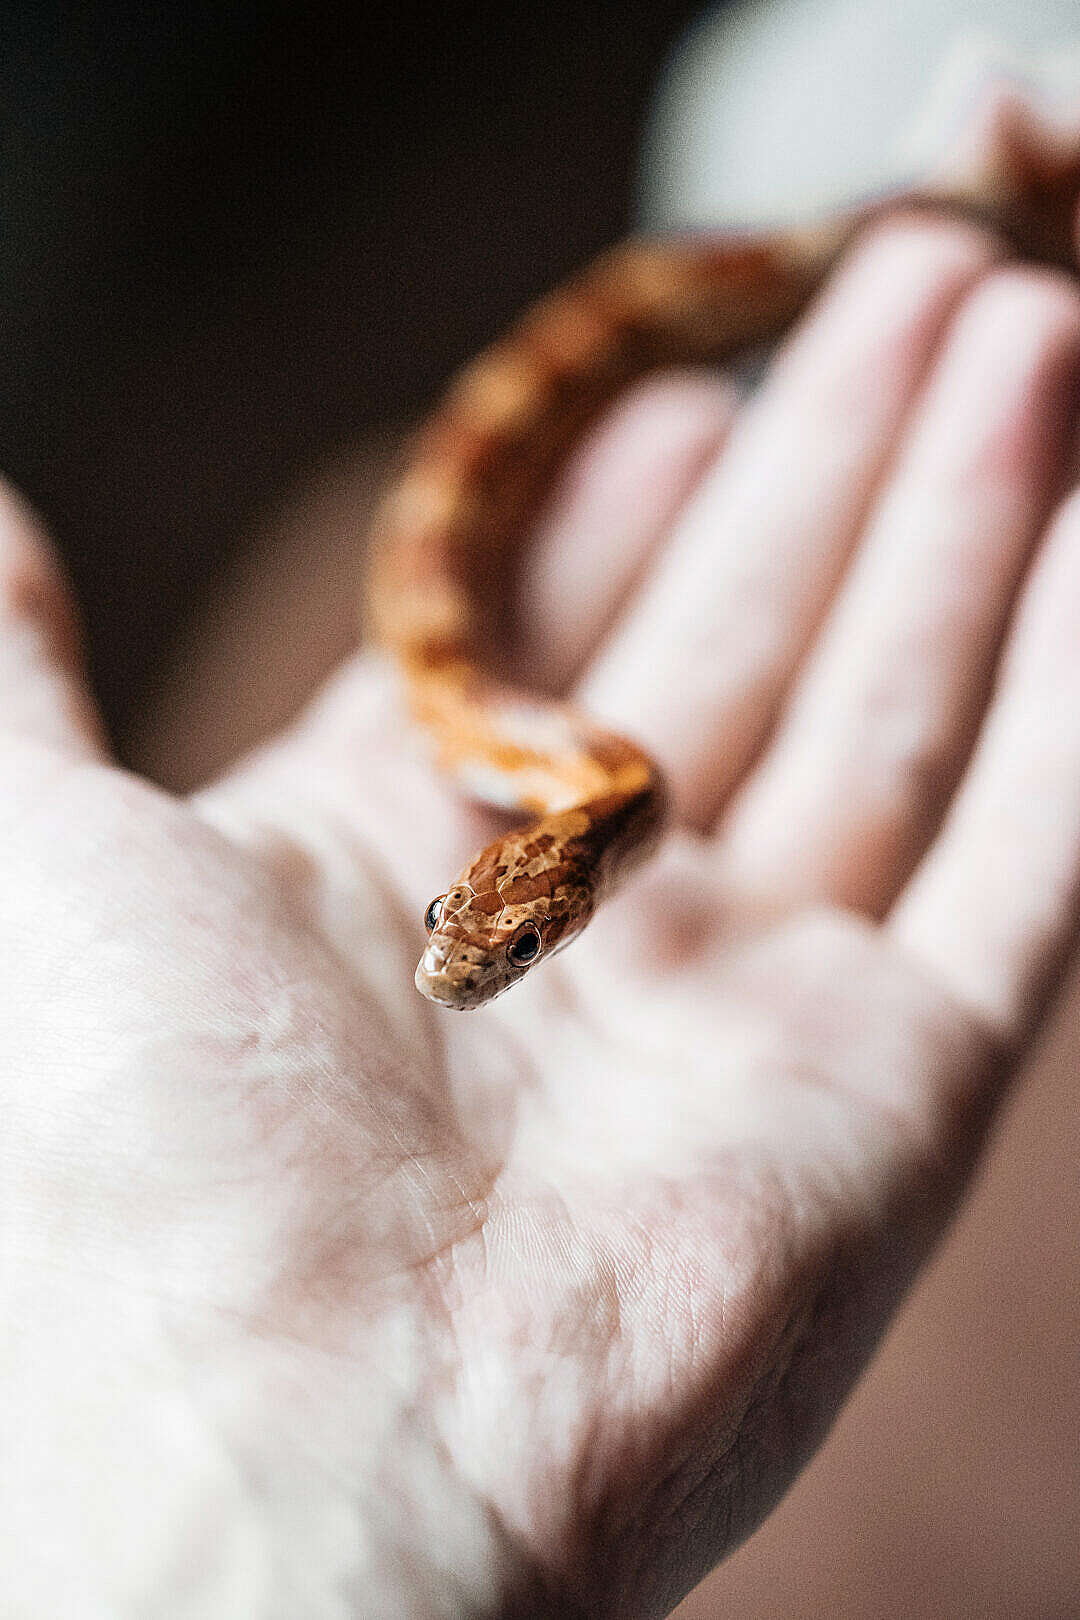 Download Little Corn Snake in Hand FREE Stock Photo